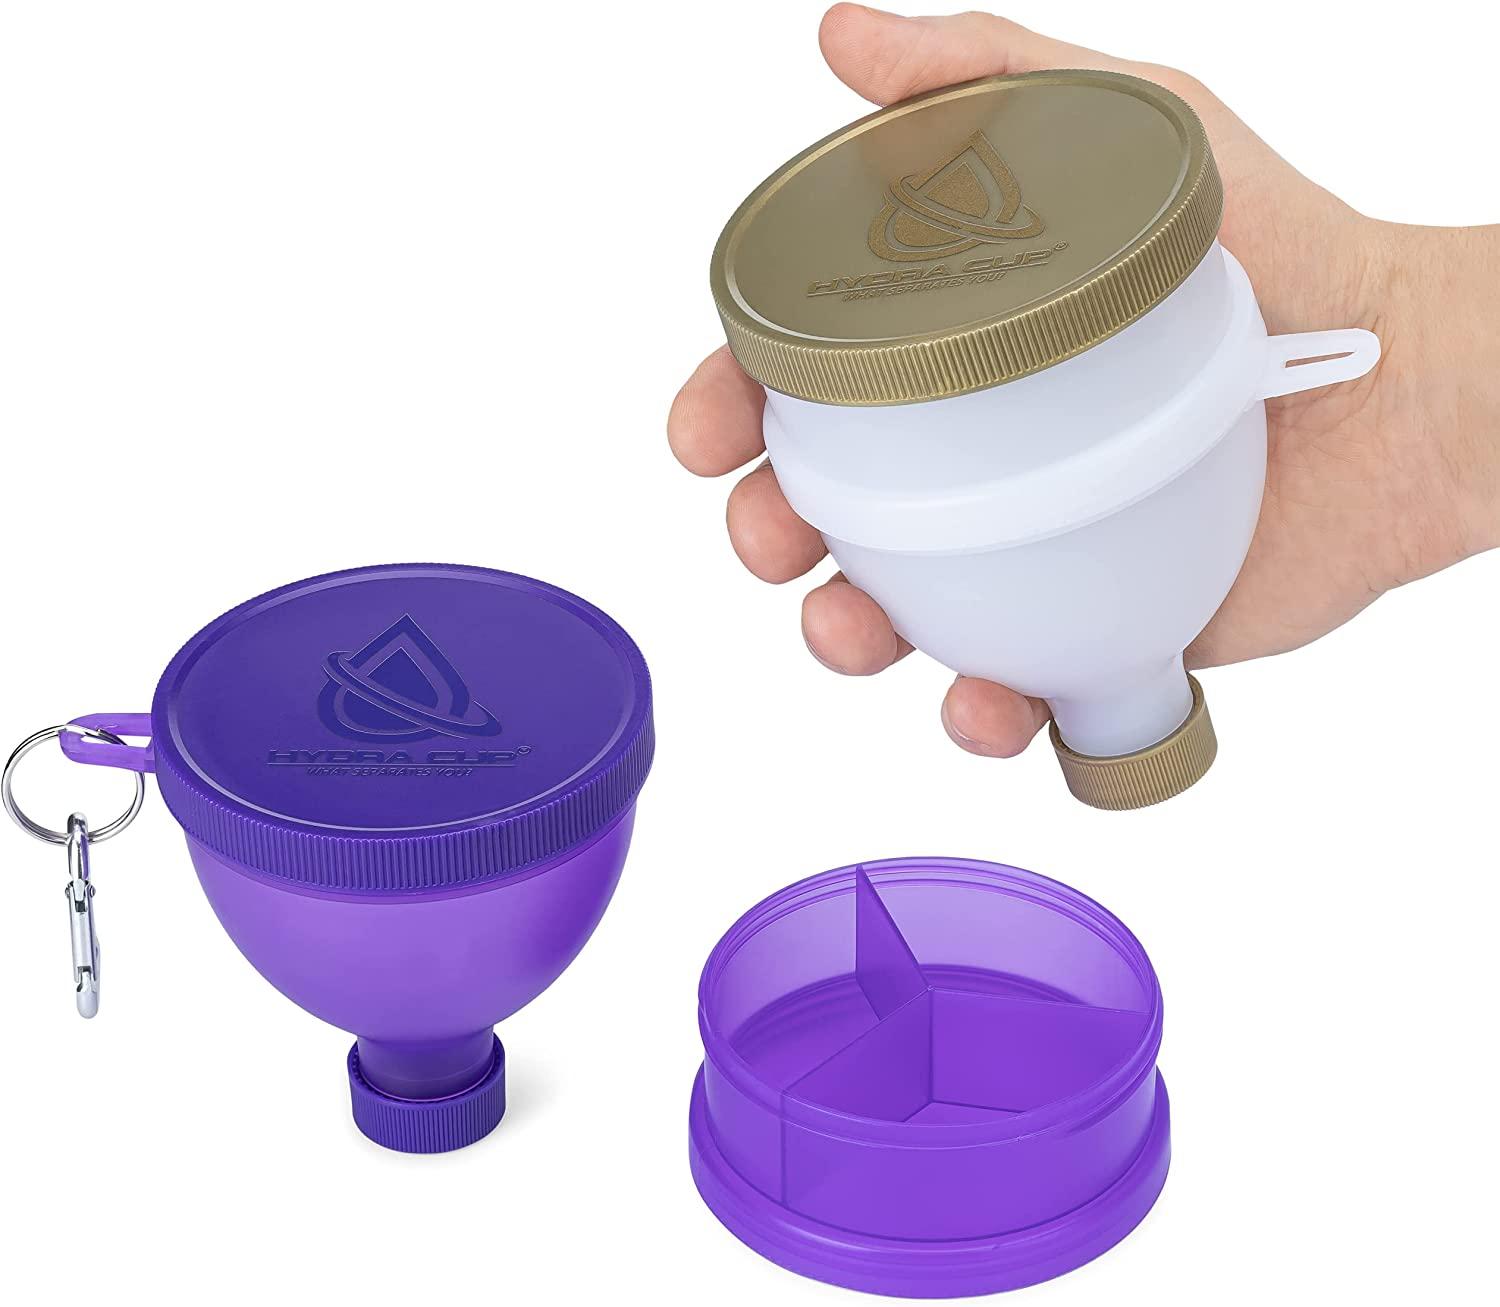 Protein Powder Funnel Container